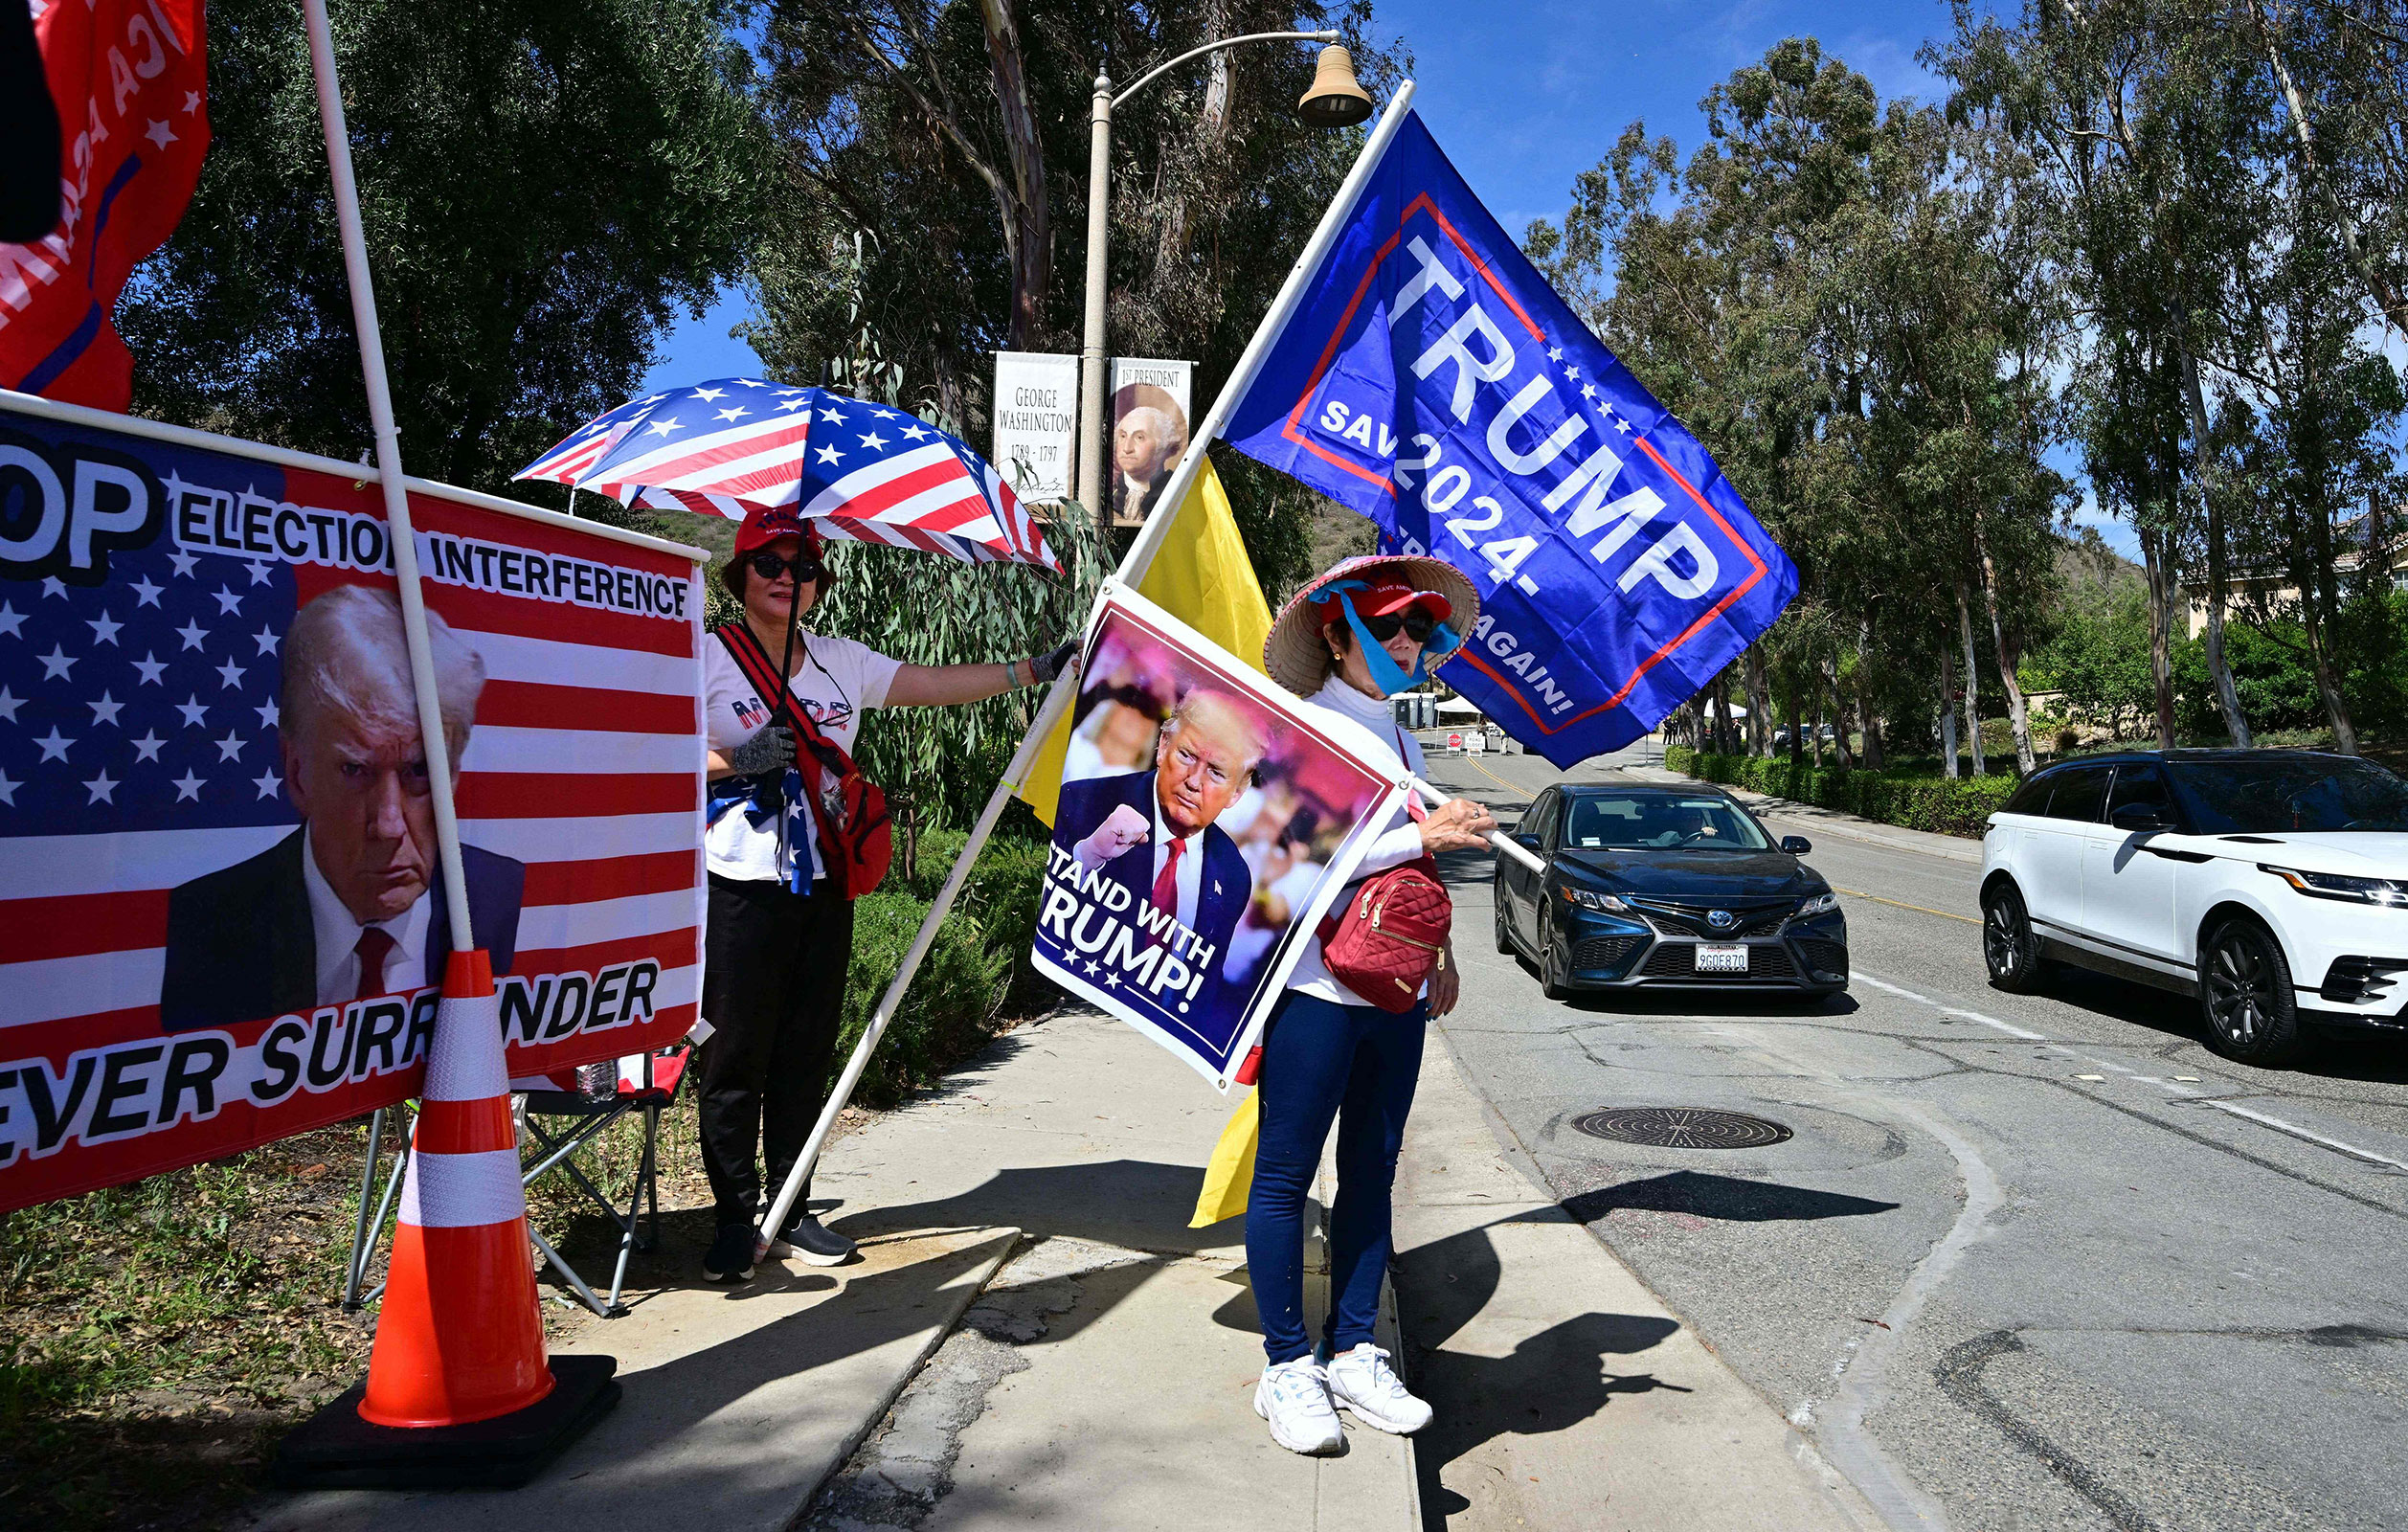 Supporters of former President Donald Trump gather near the entrance to the Ronald Reagan Library in Simi Valley, California, on September 27, 2023, ahead of the second Republica primary debate which the former president will not attend.